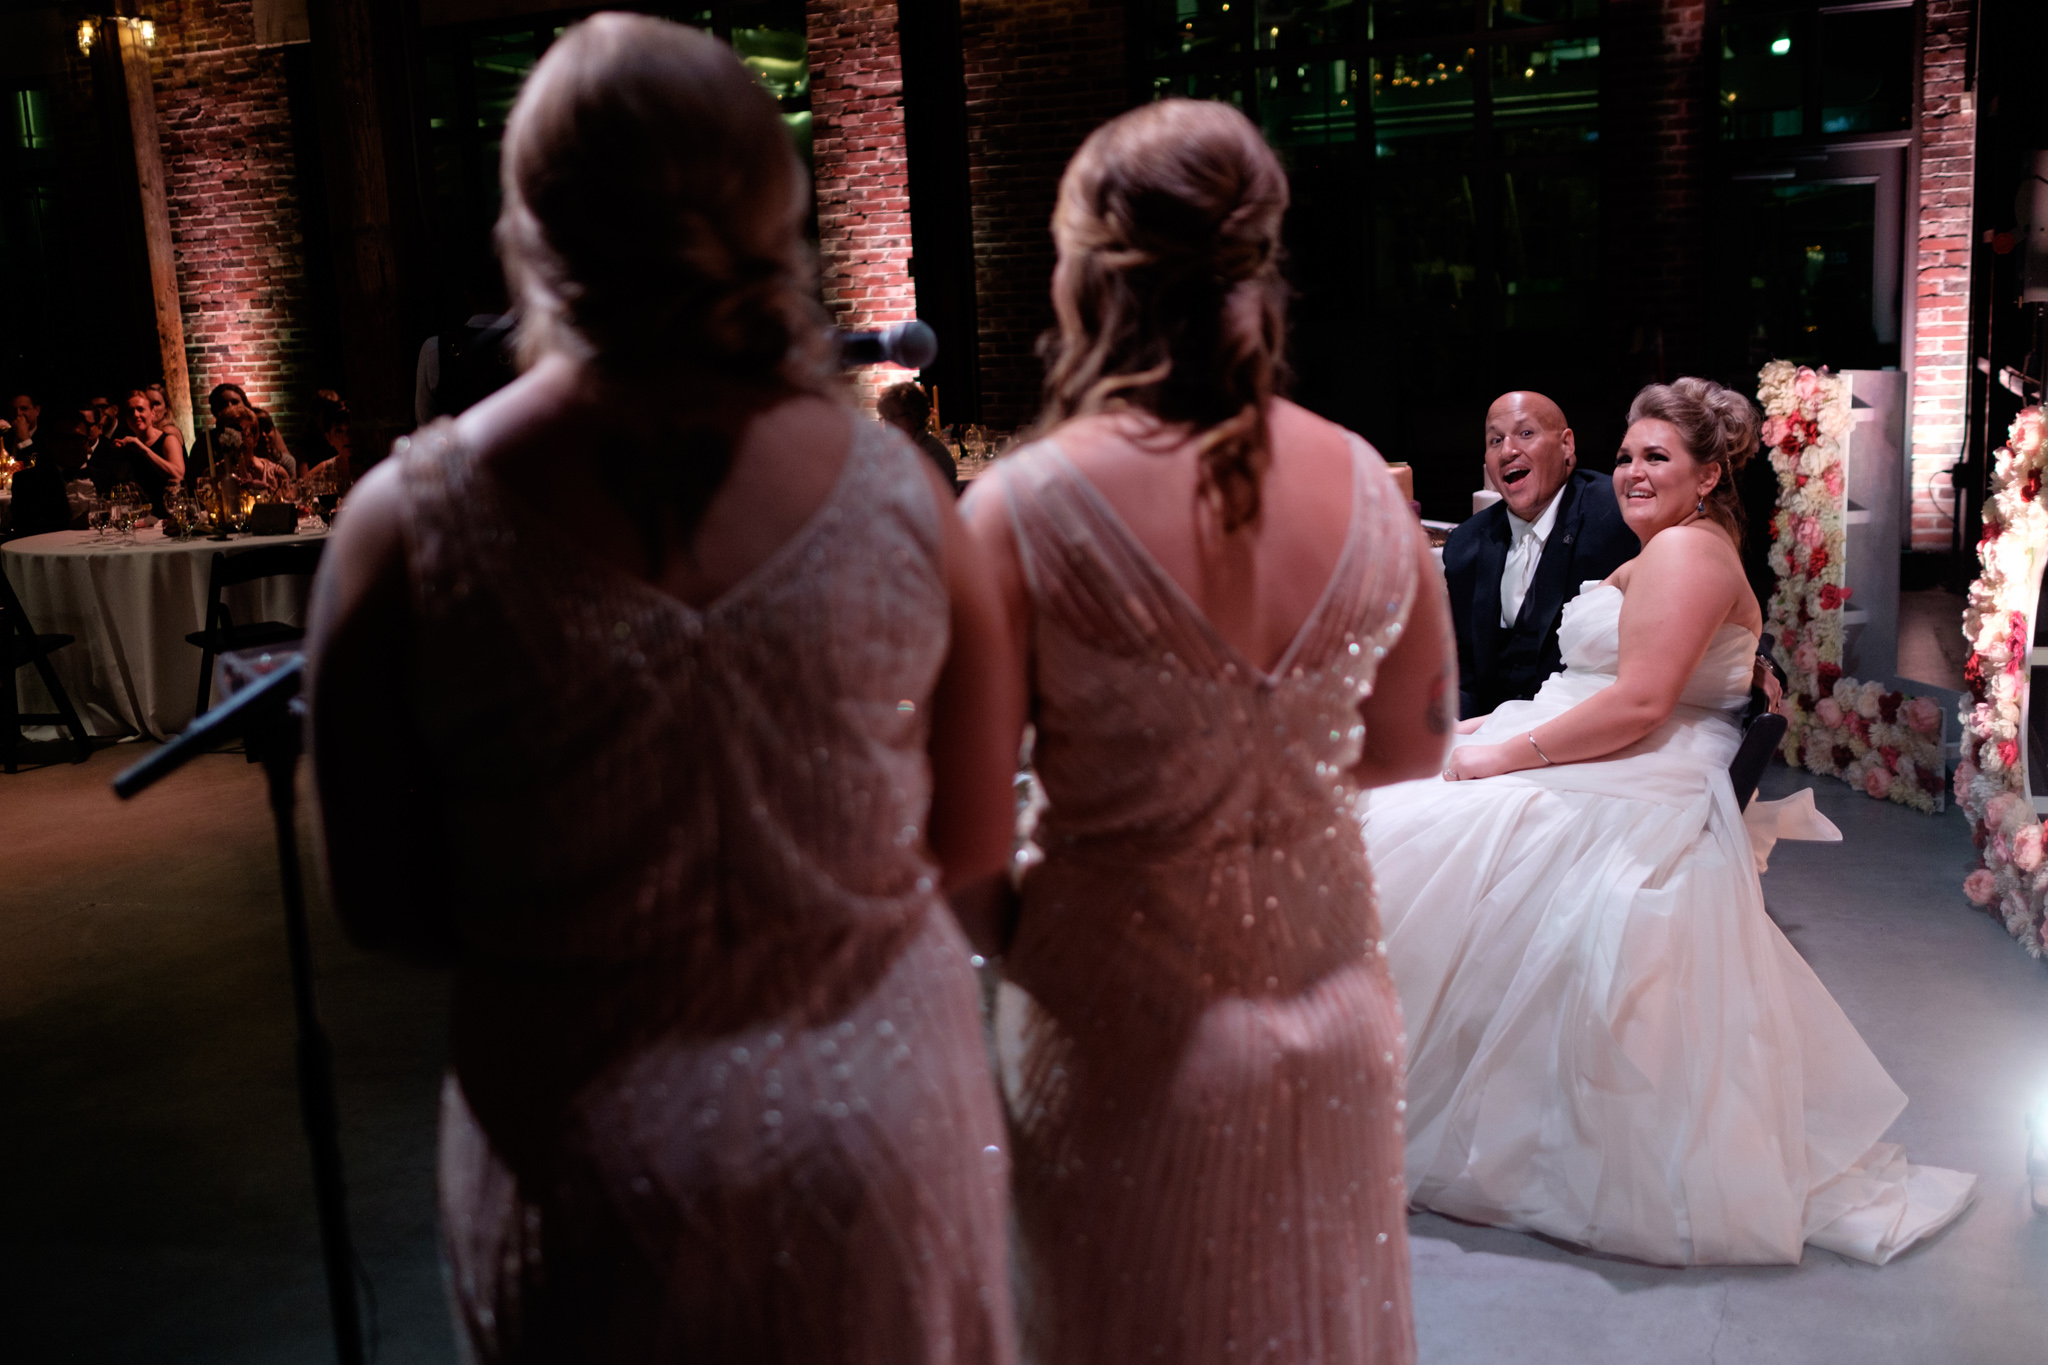  Savannah and Bernie share a laugh as Savannah's sisters give their speech during the reception at their SteamWhistle Brewery wedding in Toronto.&nbsp; 